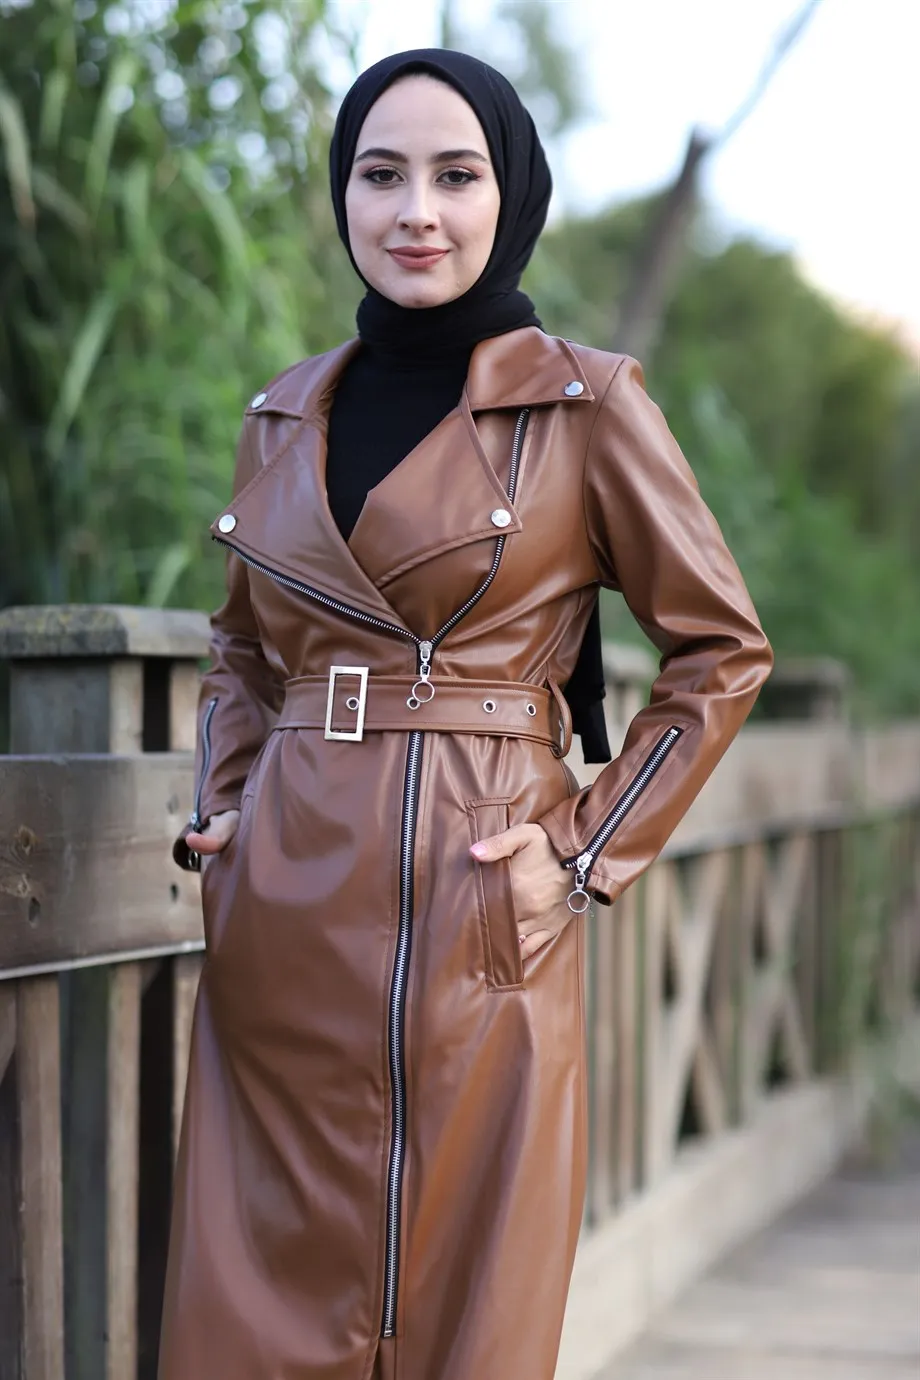 Women long leather trench coat with pockets kemerli hijab long faux leather trench coat Muslim fashion daily casual use women's outerwear jacket